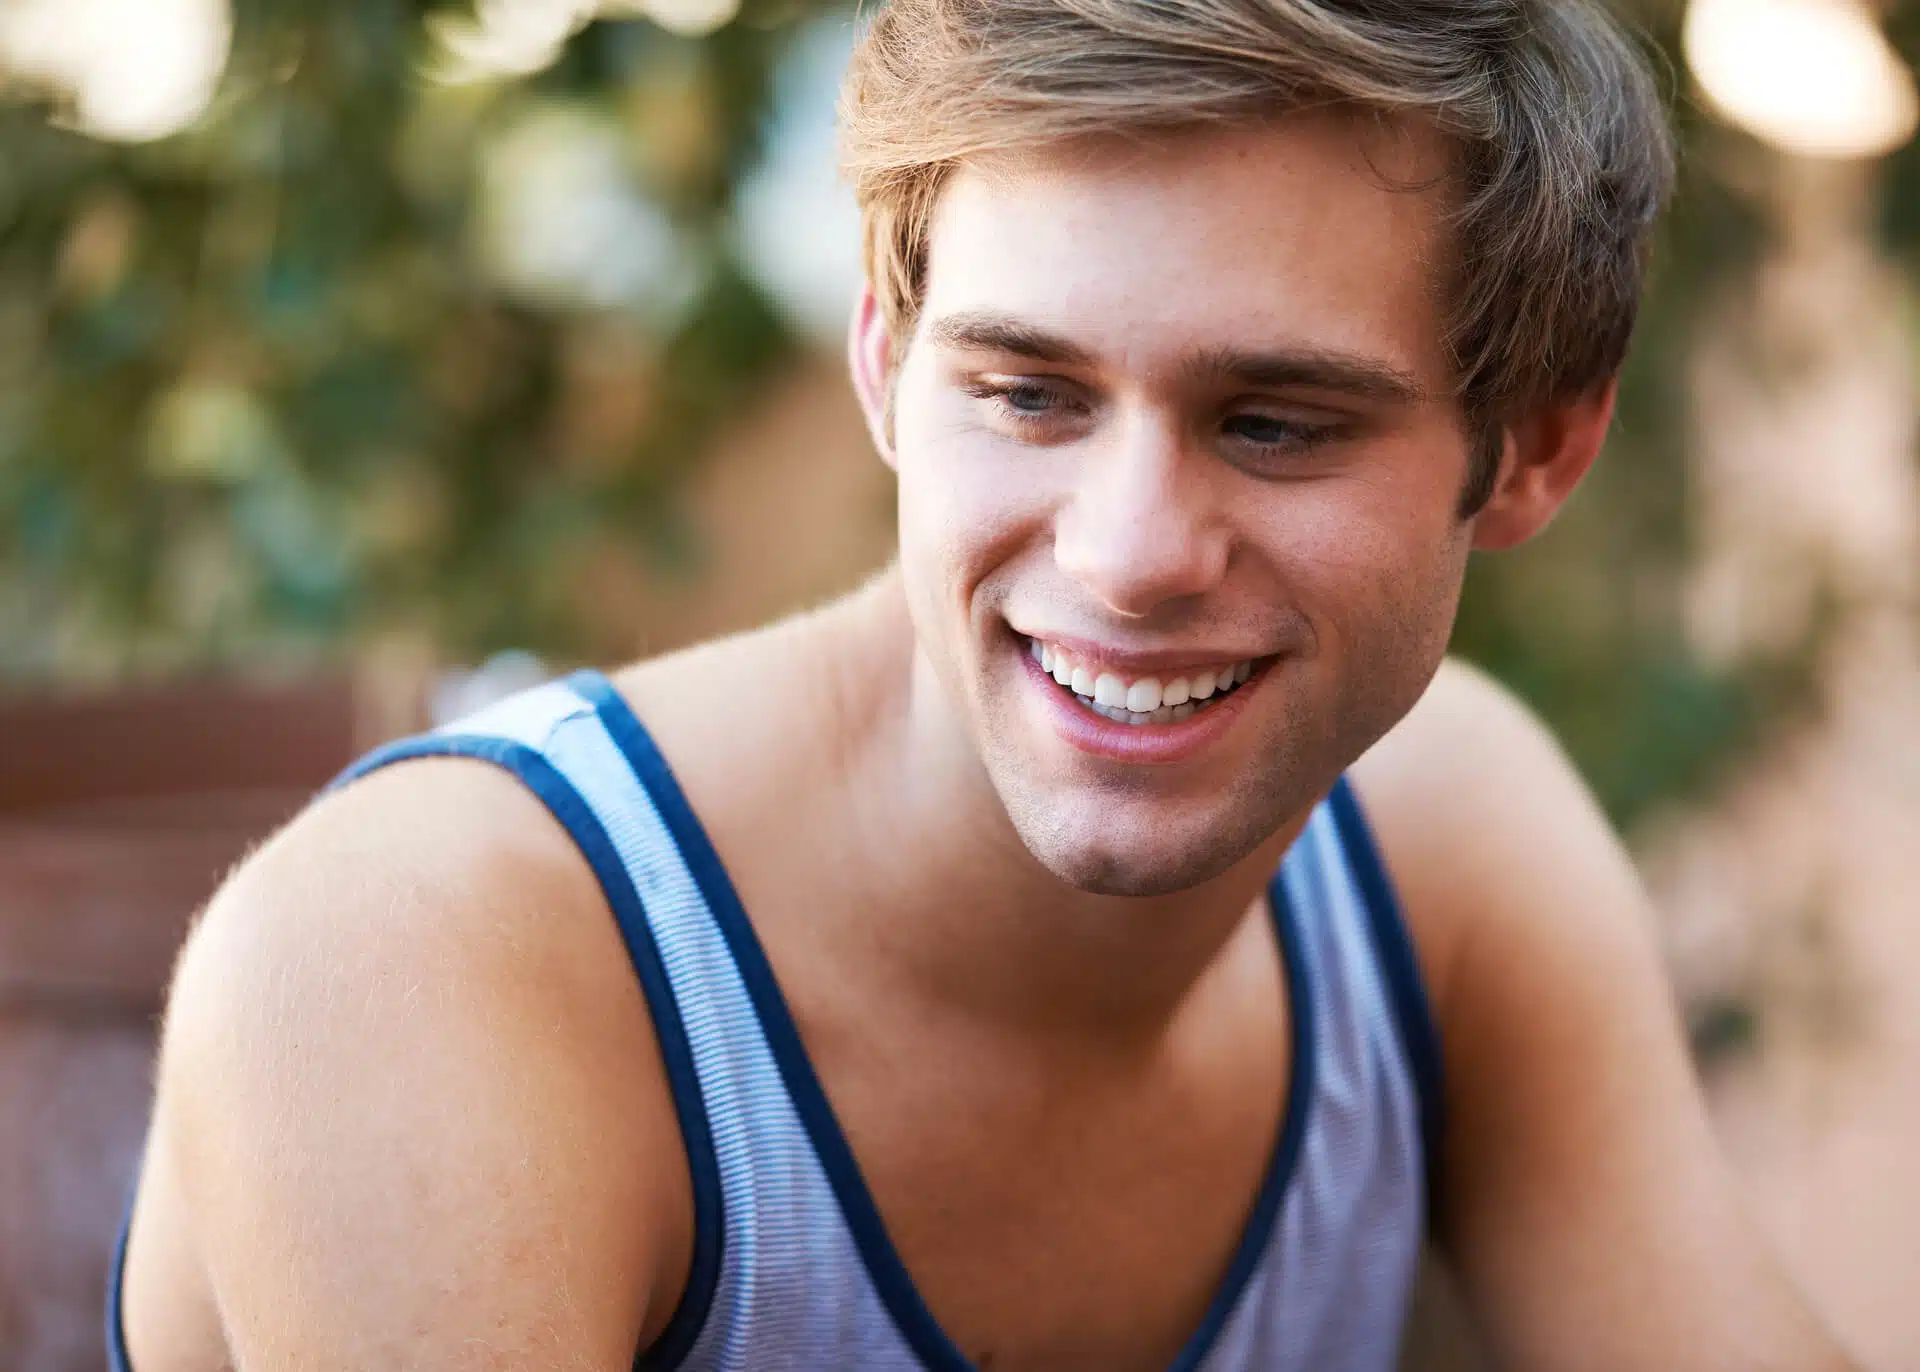 shy young man smiling while looking away